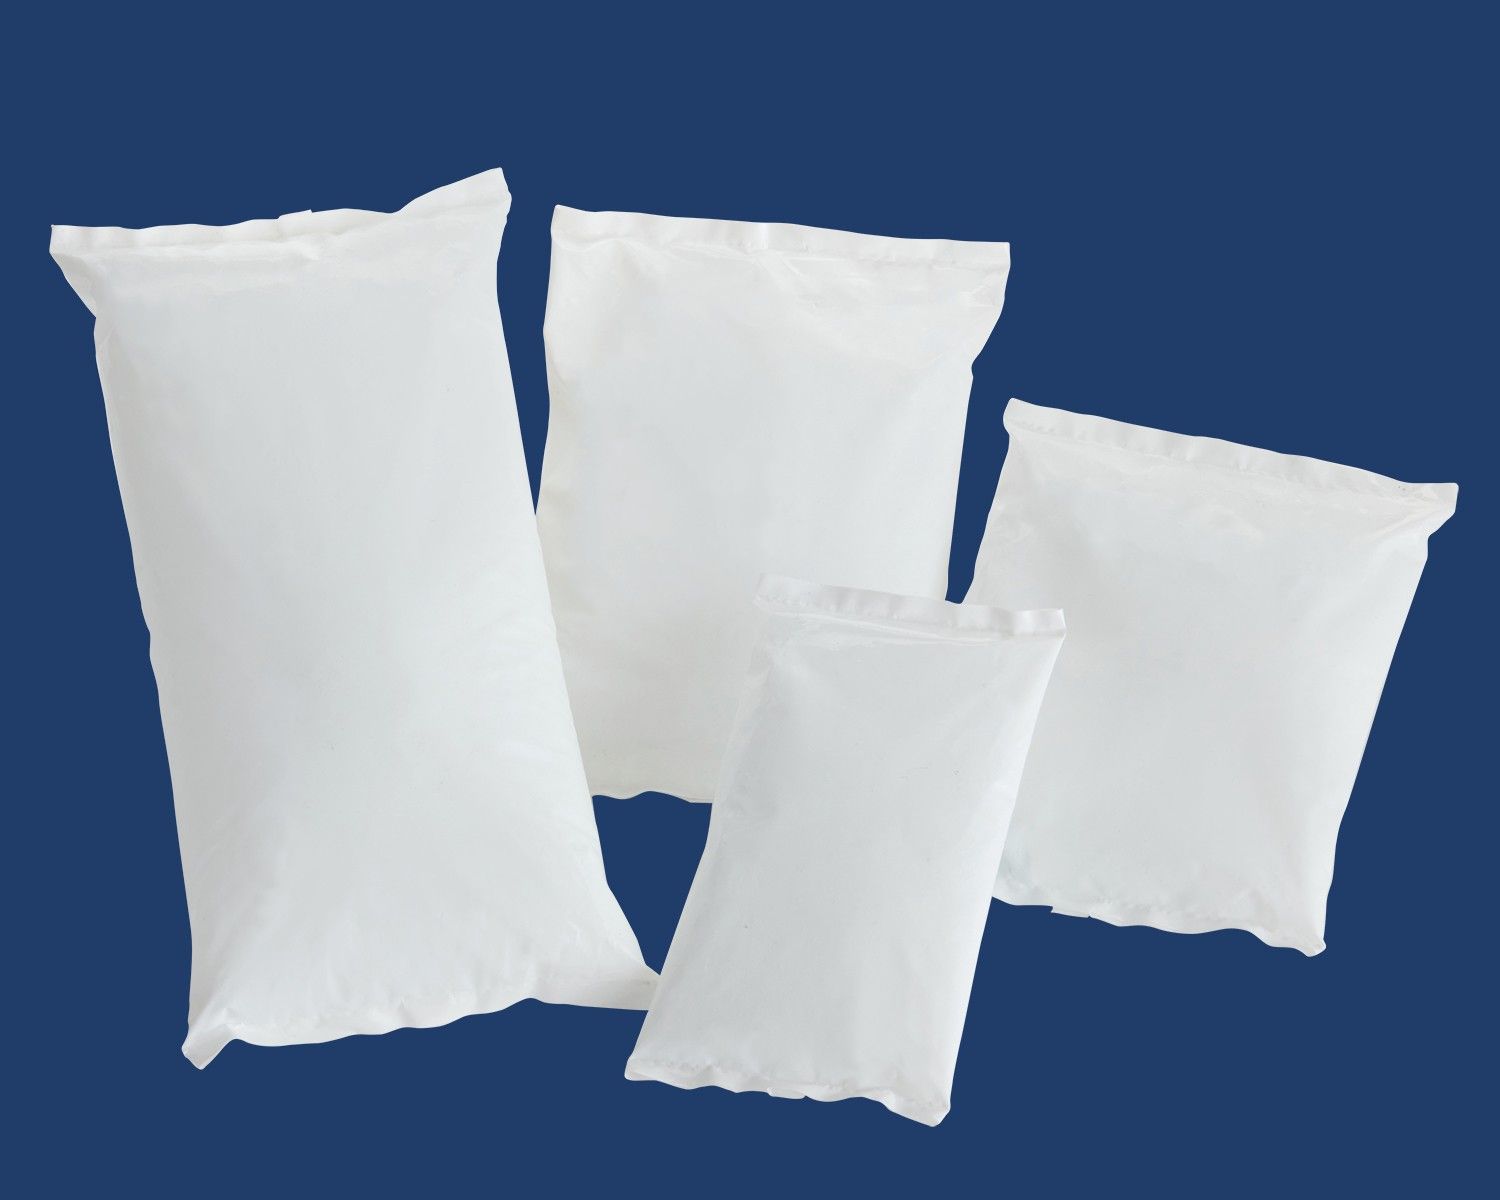 a picture of 4 different sizes of mat white gel packs on a dark blue background 